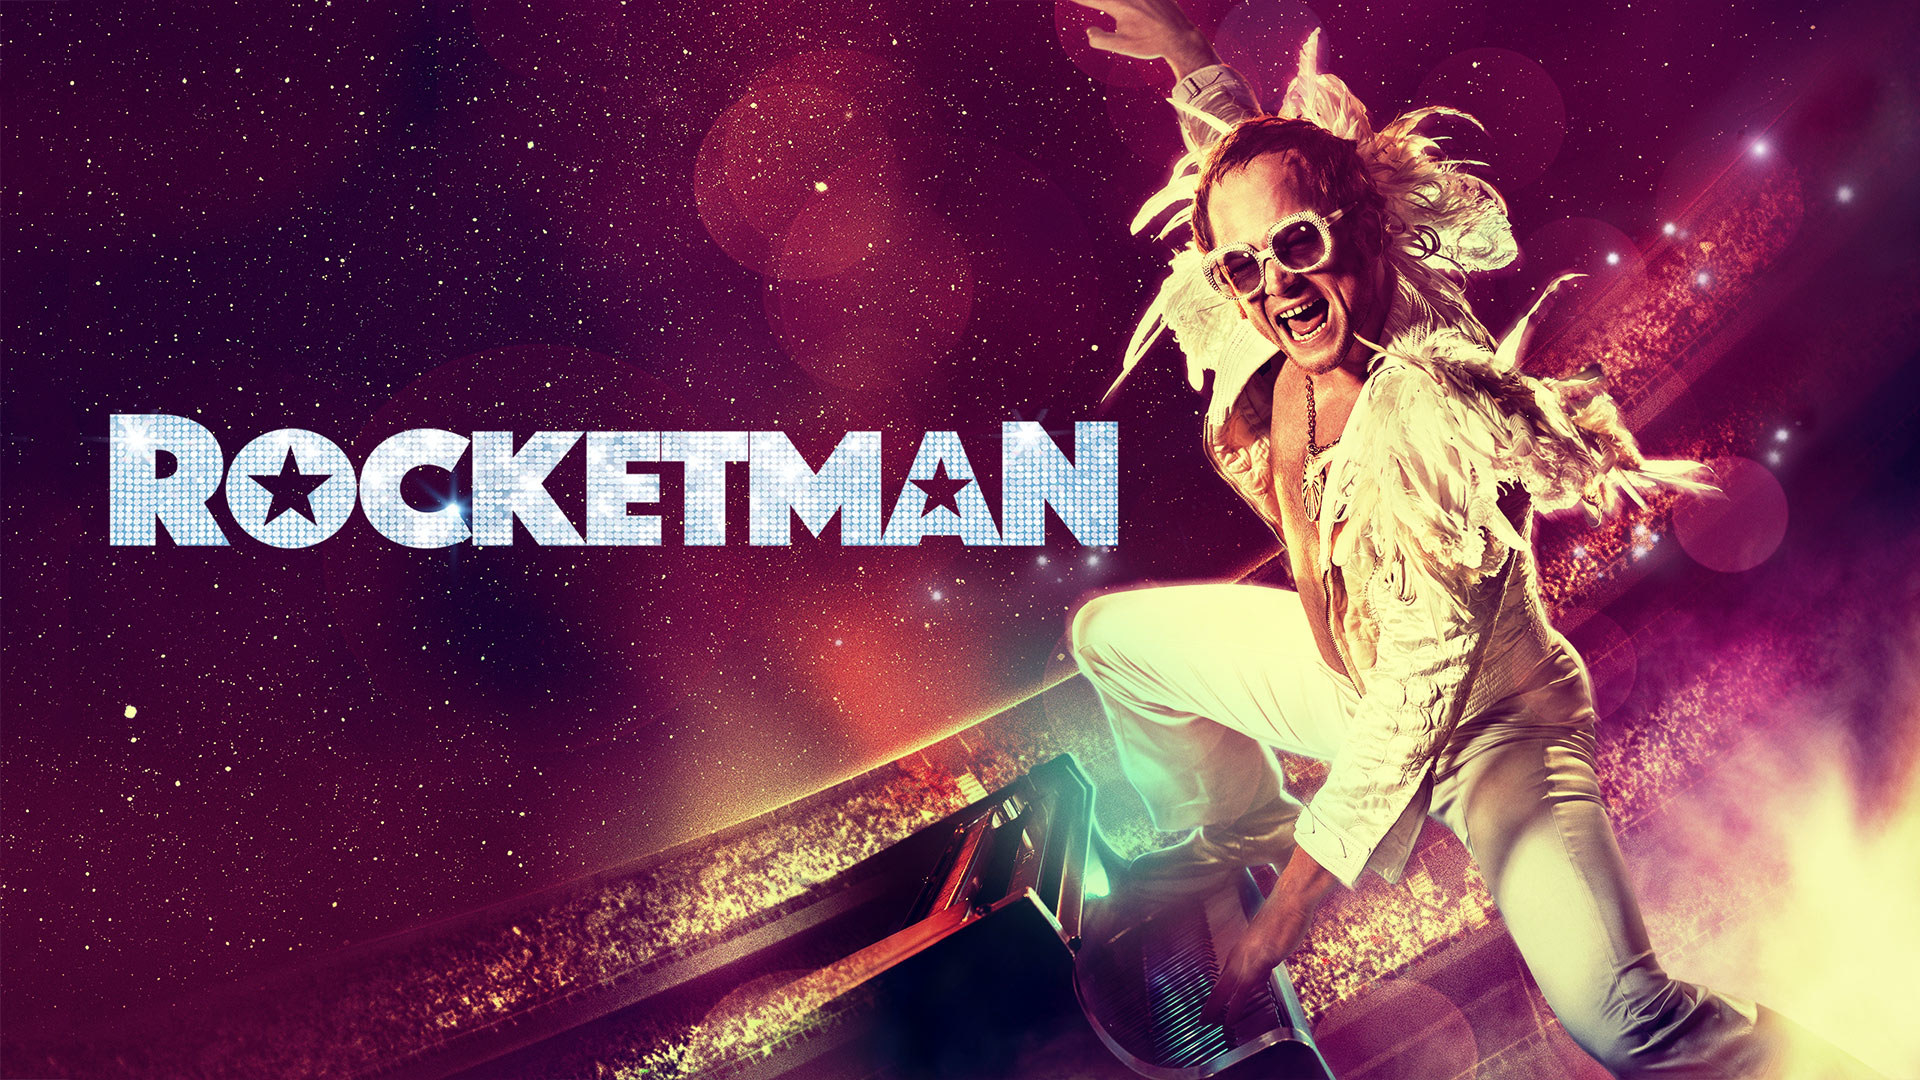 Movie poster for the movie &quot;Rocketman&quot; featuring Taron Egerton as a young Sir Elton John